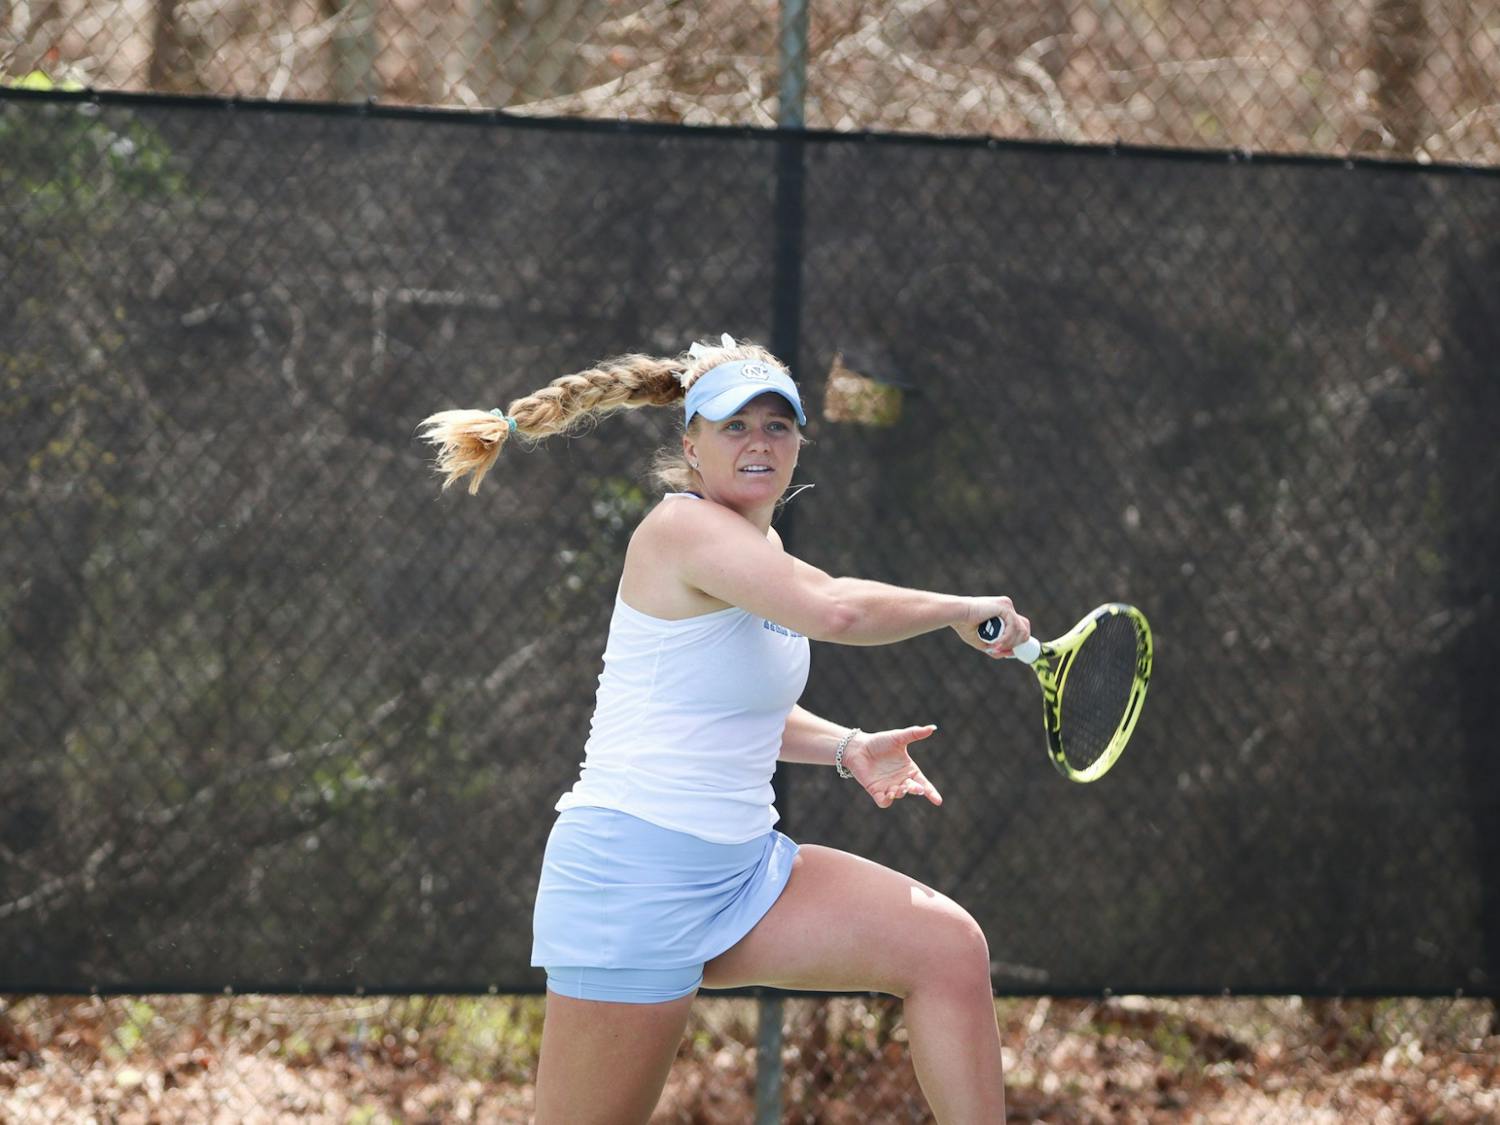 Senior Alle Sanford goes to return a volley from her Boston College opponent during her singles match. UNC won 6-1 at home on Sunday, March 20, 2022.